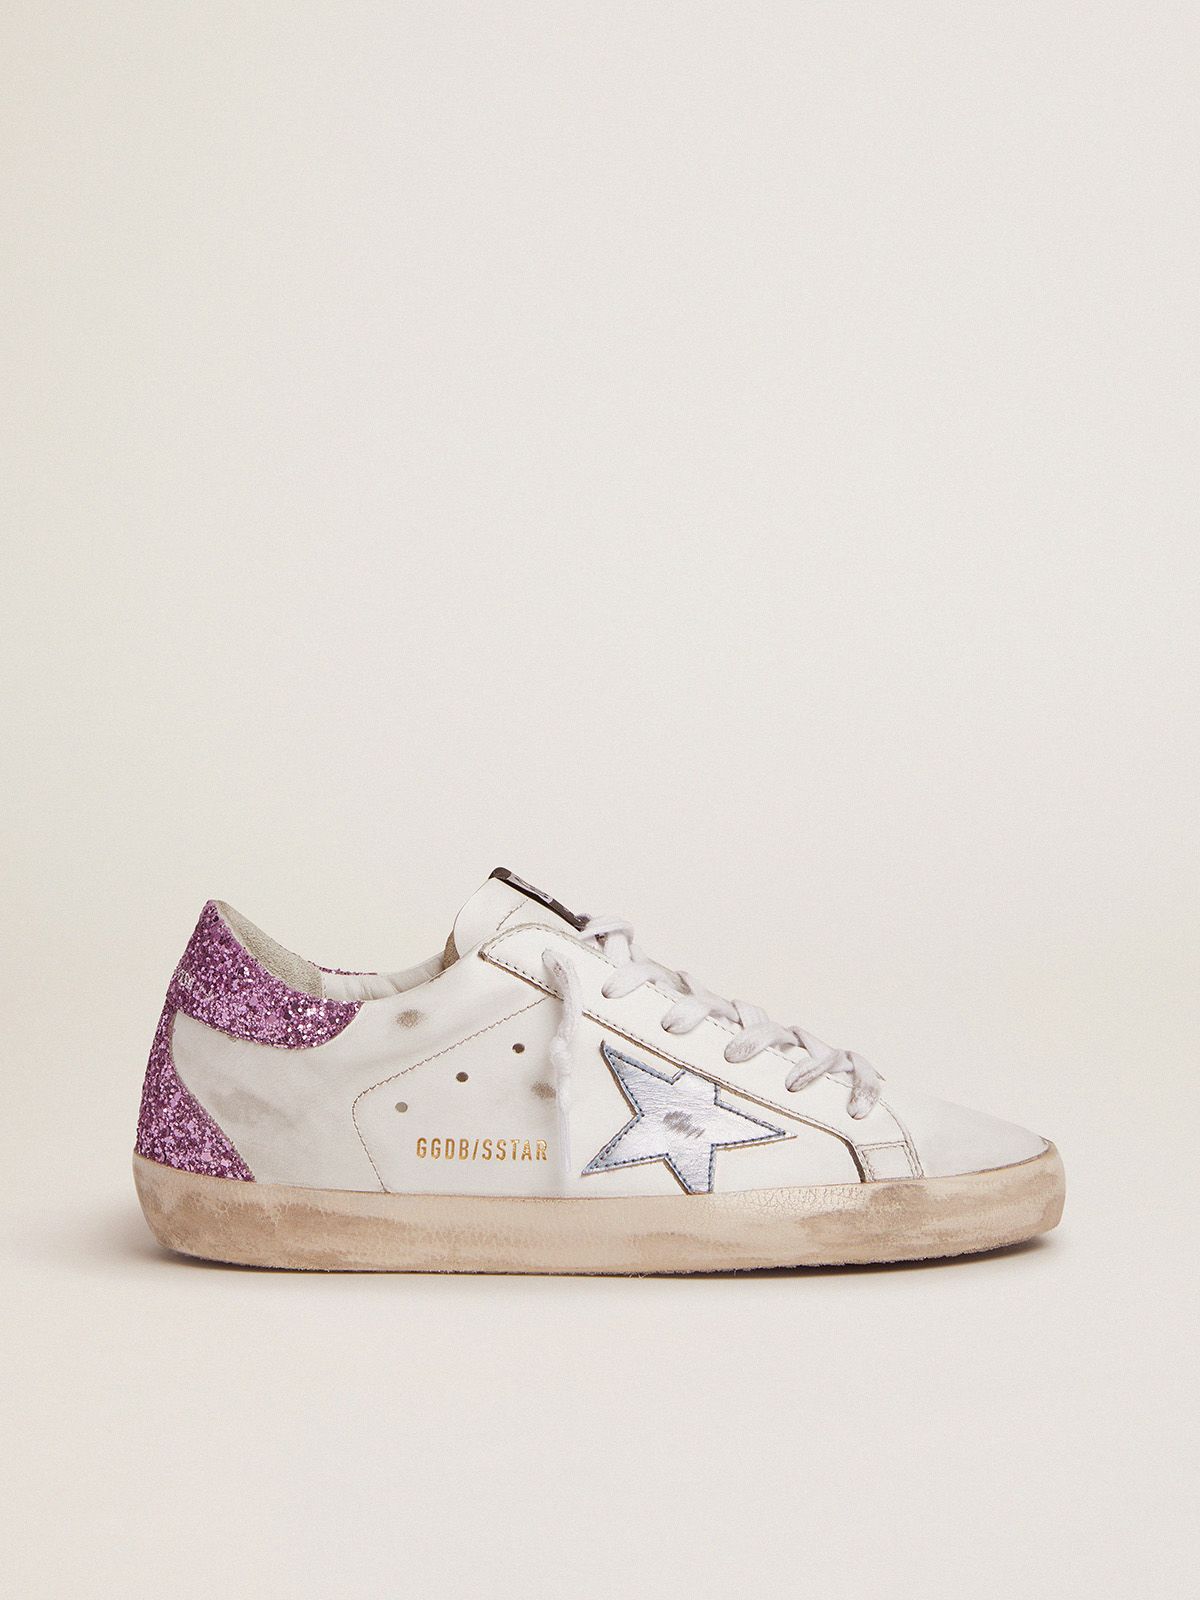 golden goose star leather Super-Star lavender glitter and metallic with sneakers light-blue heel tab